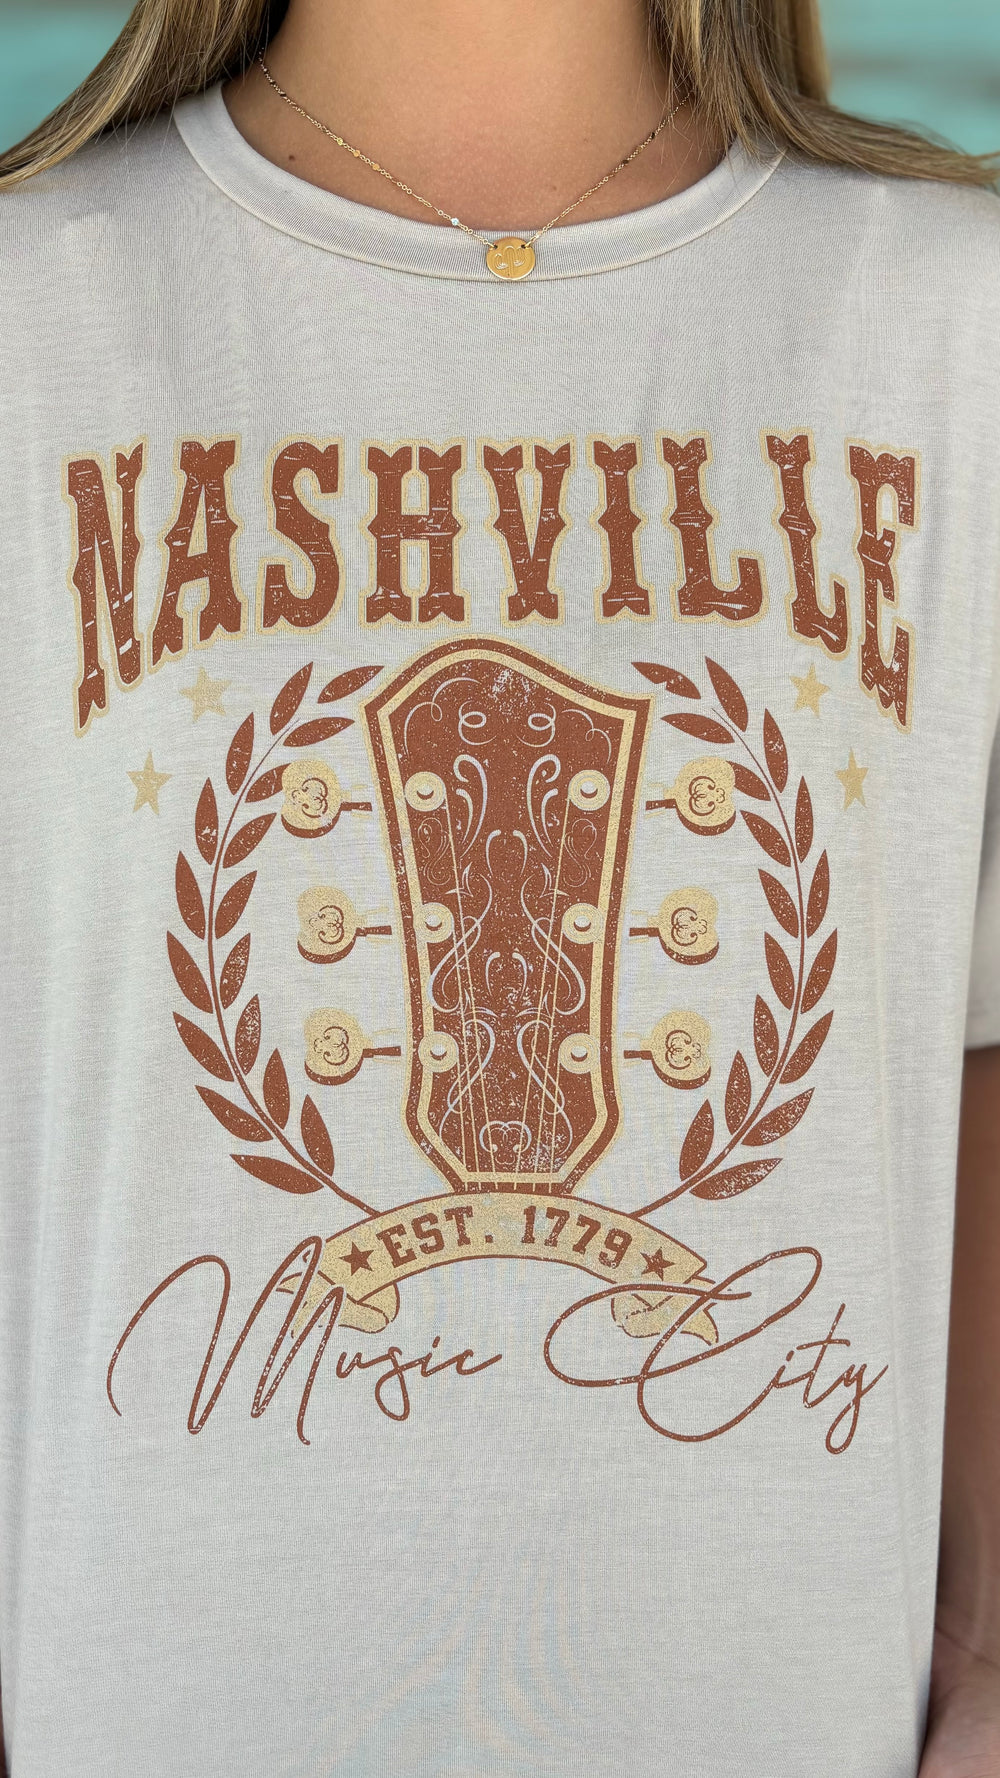 Nashville Graphic Tee-Graphic Tees-Gilli-Evergreen Boutique, Women’s Fashion Boutique in Santa Claus, Indiana